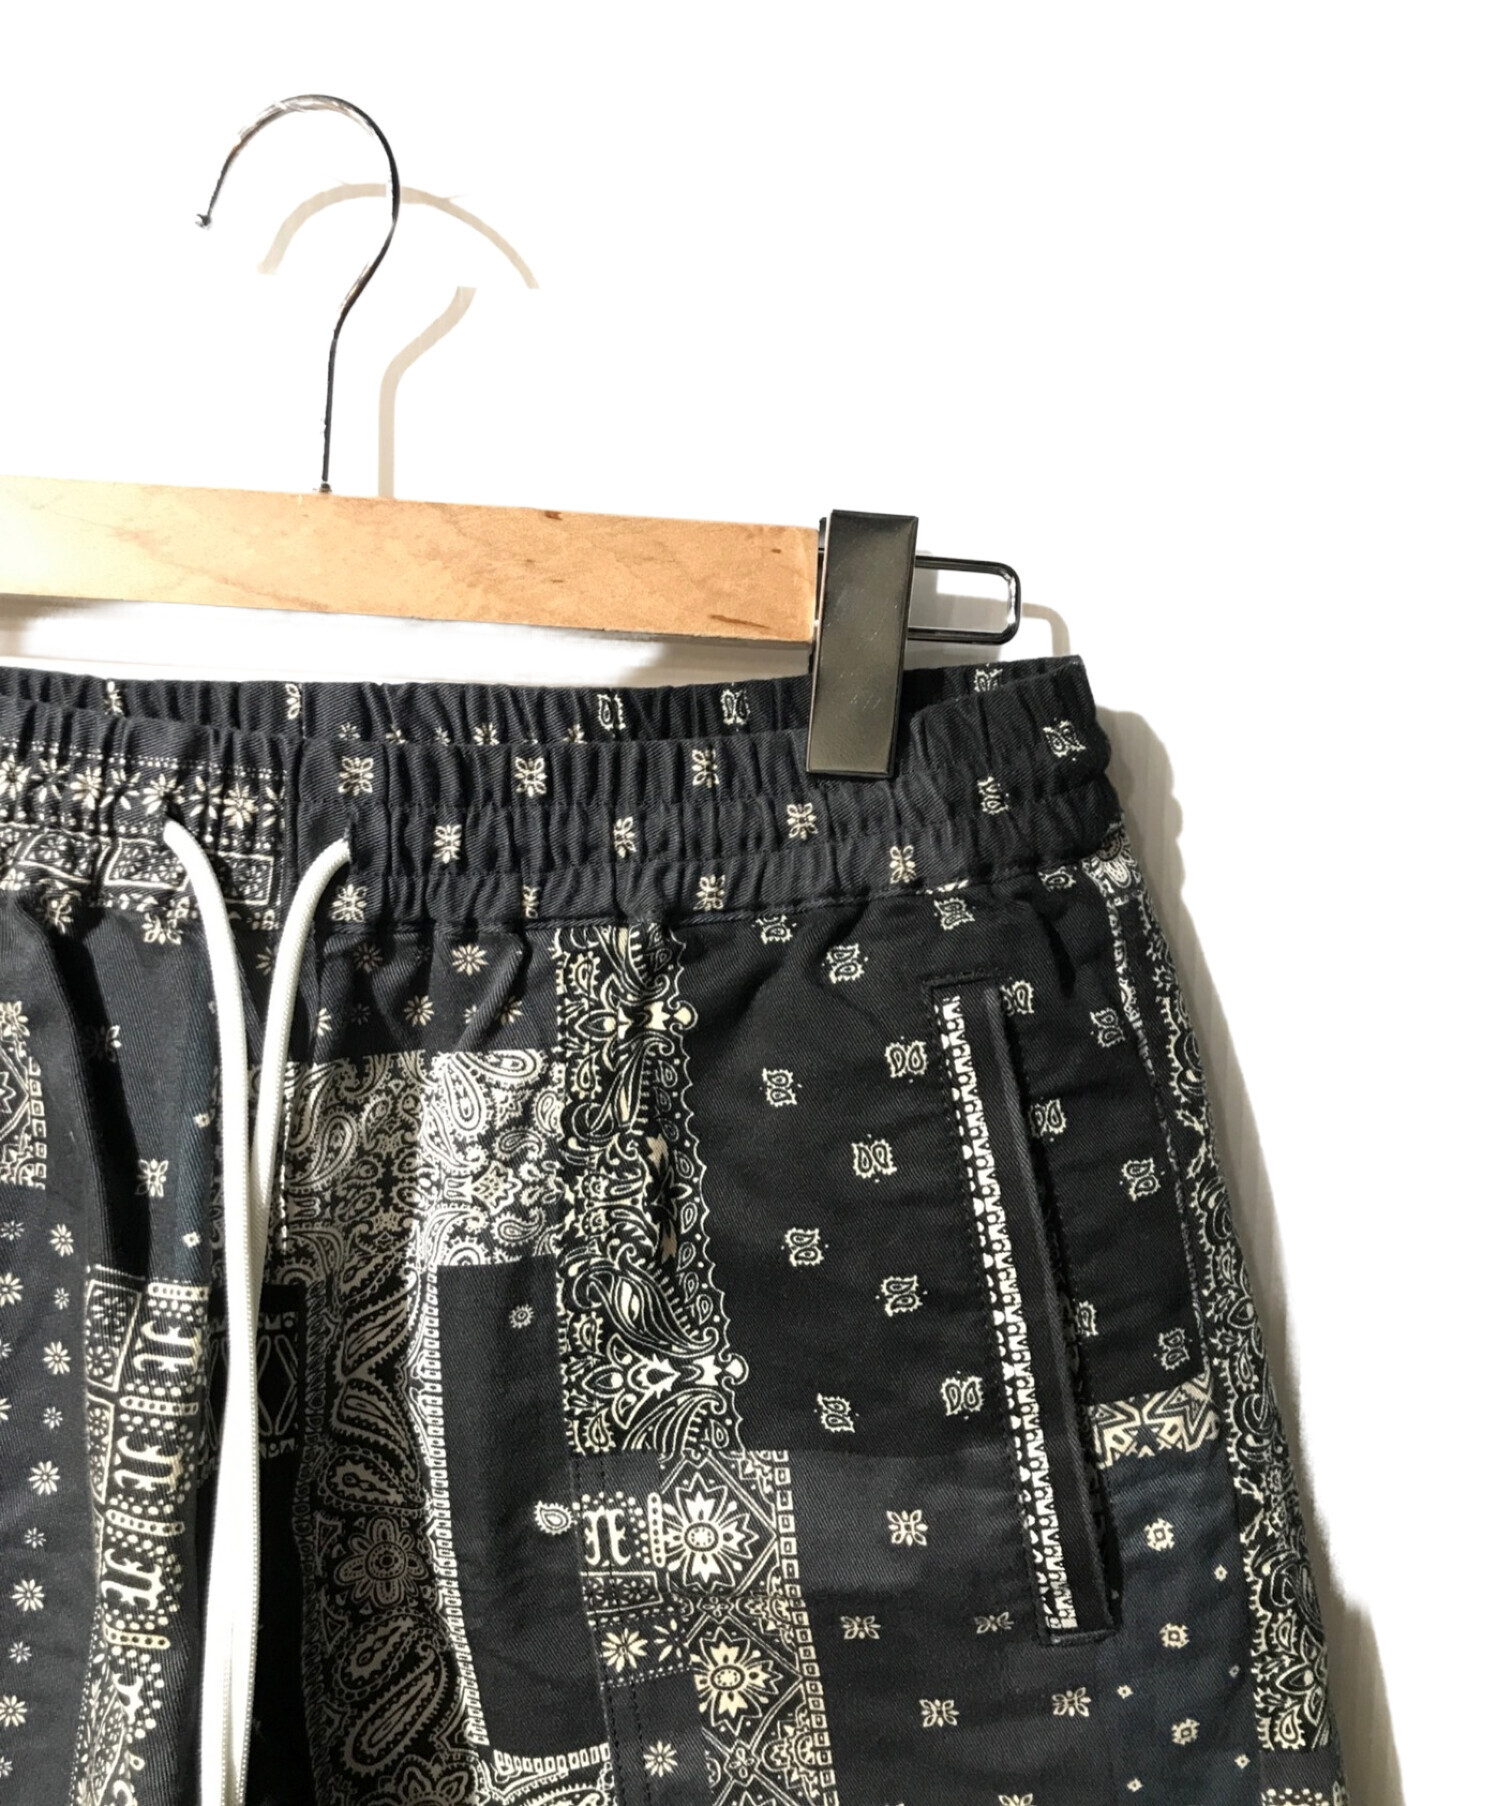 ALWAYS OUT OF STOCK PAISLEY SHORTS